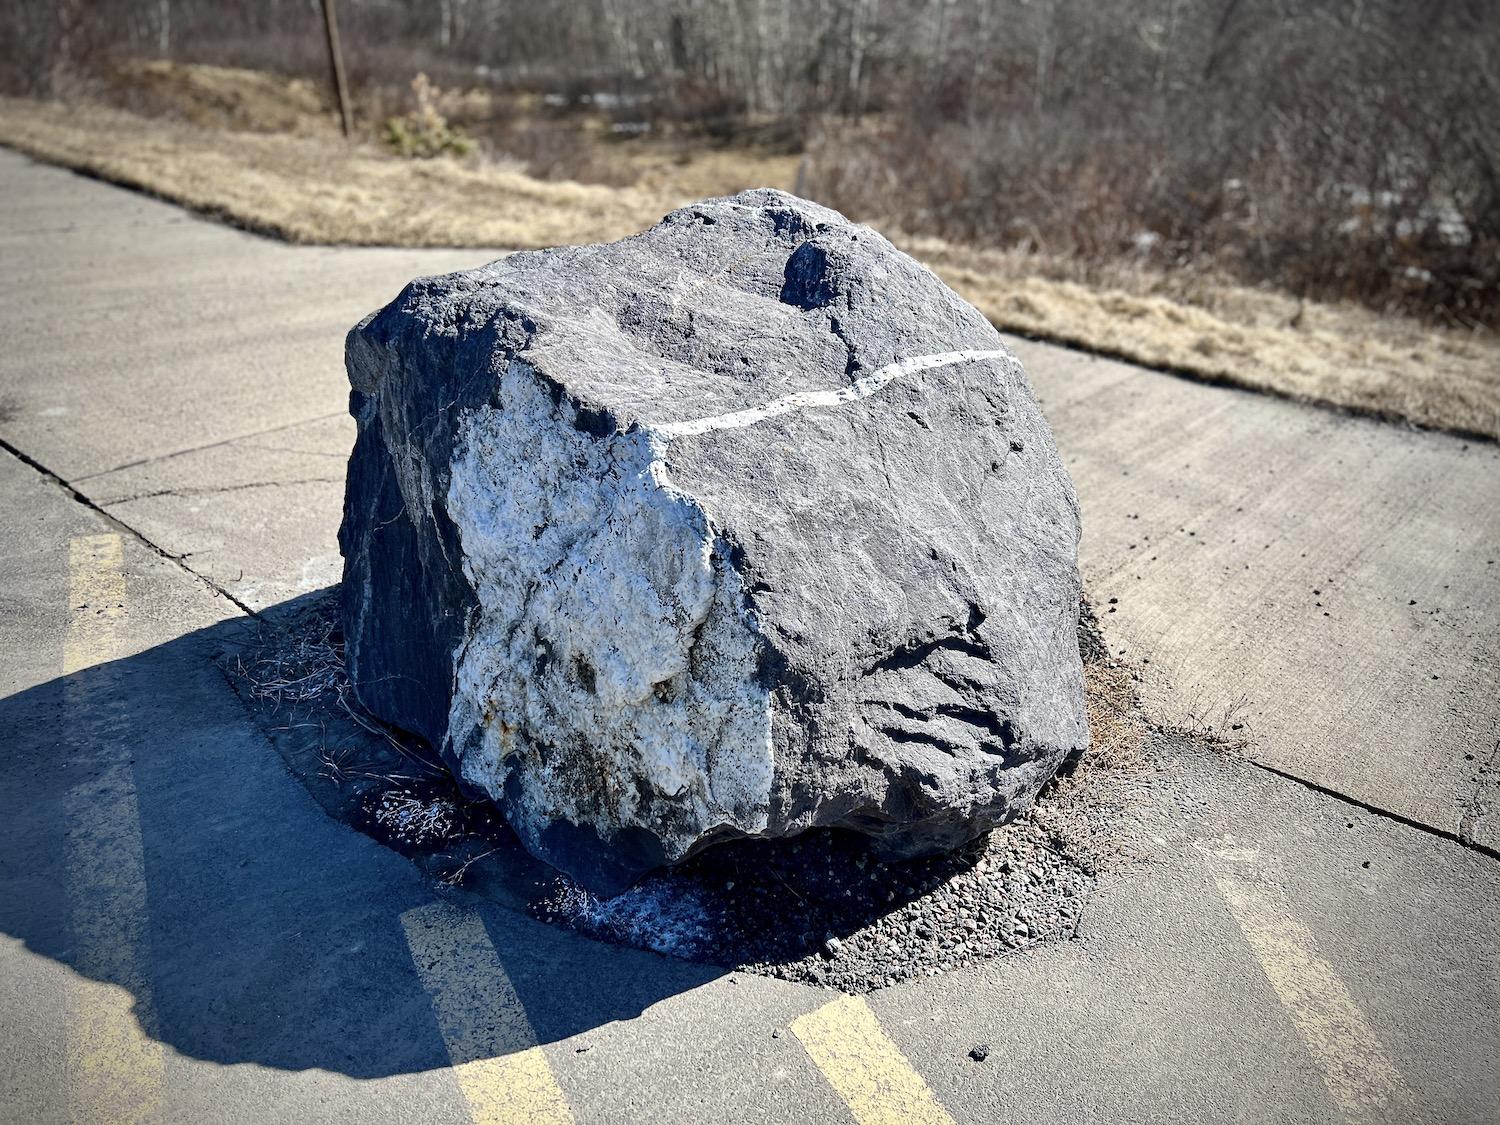 When Parks Canada built a roadside rest stop, it made sure to save this interesting boulder.